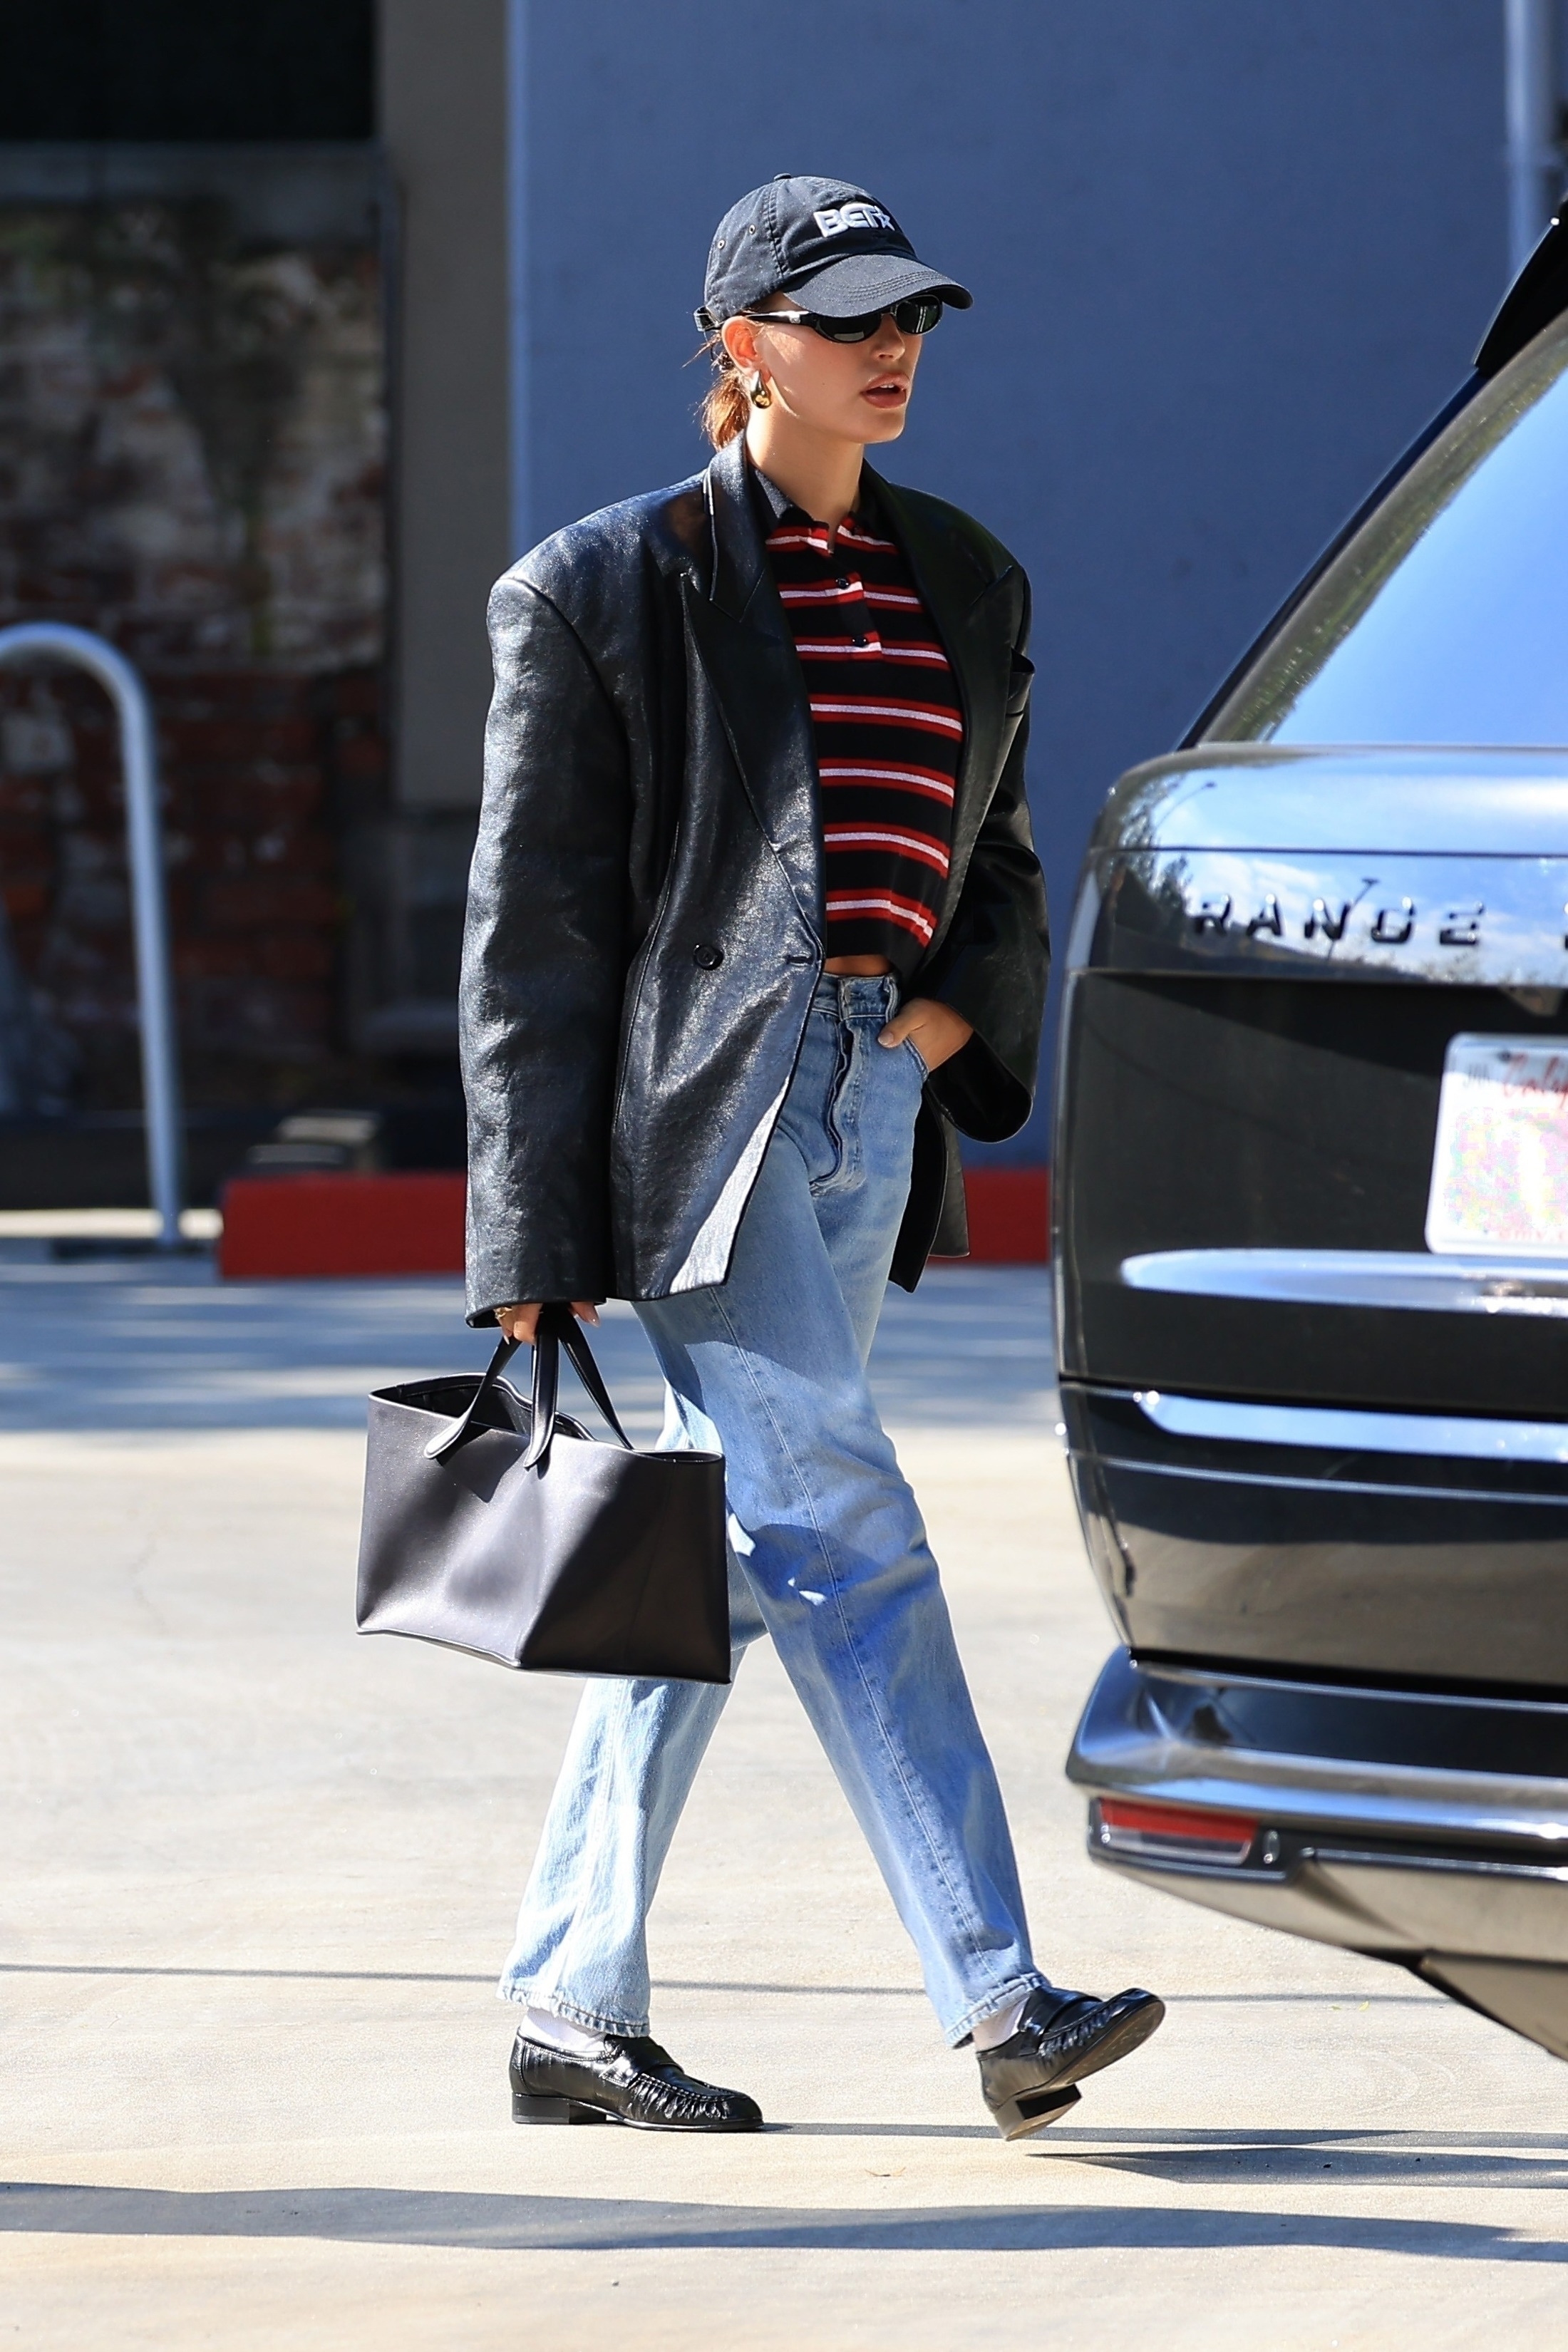 Hailey Bieber Wears a Striped Polo, Jeans, and Flats